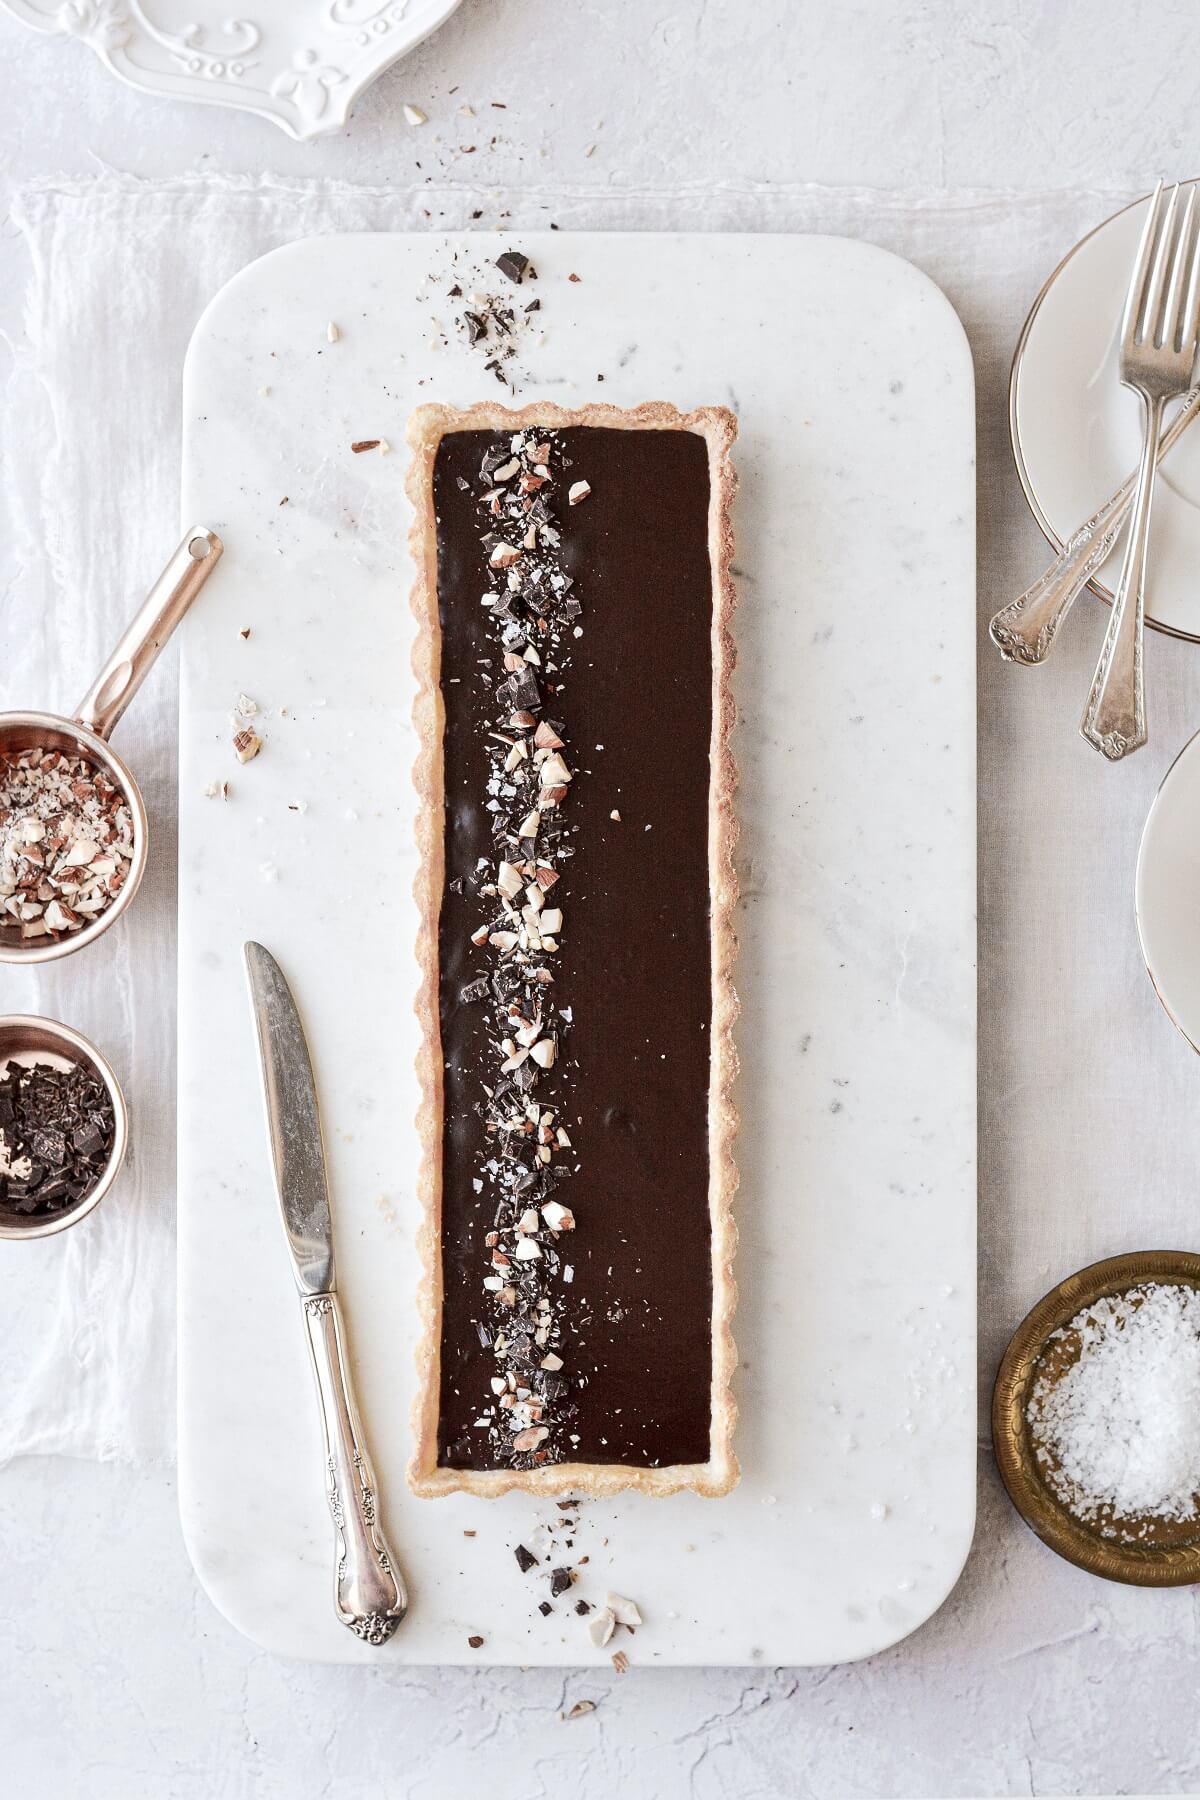 Chocolate almond tart, sprinkled with chopped chocolate and almonds, on a marble serving board.